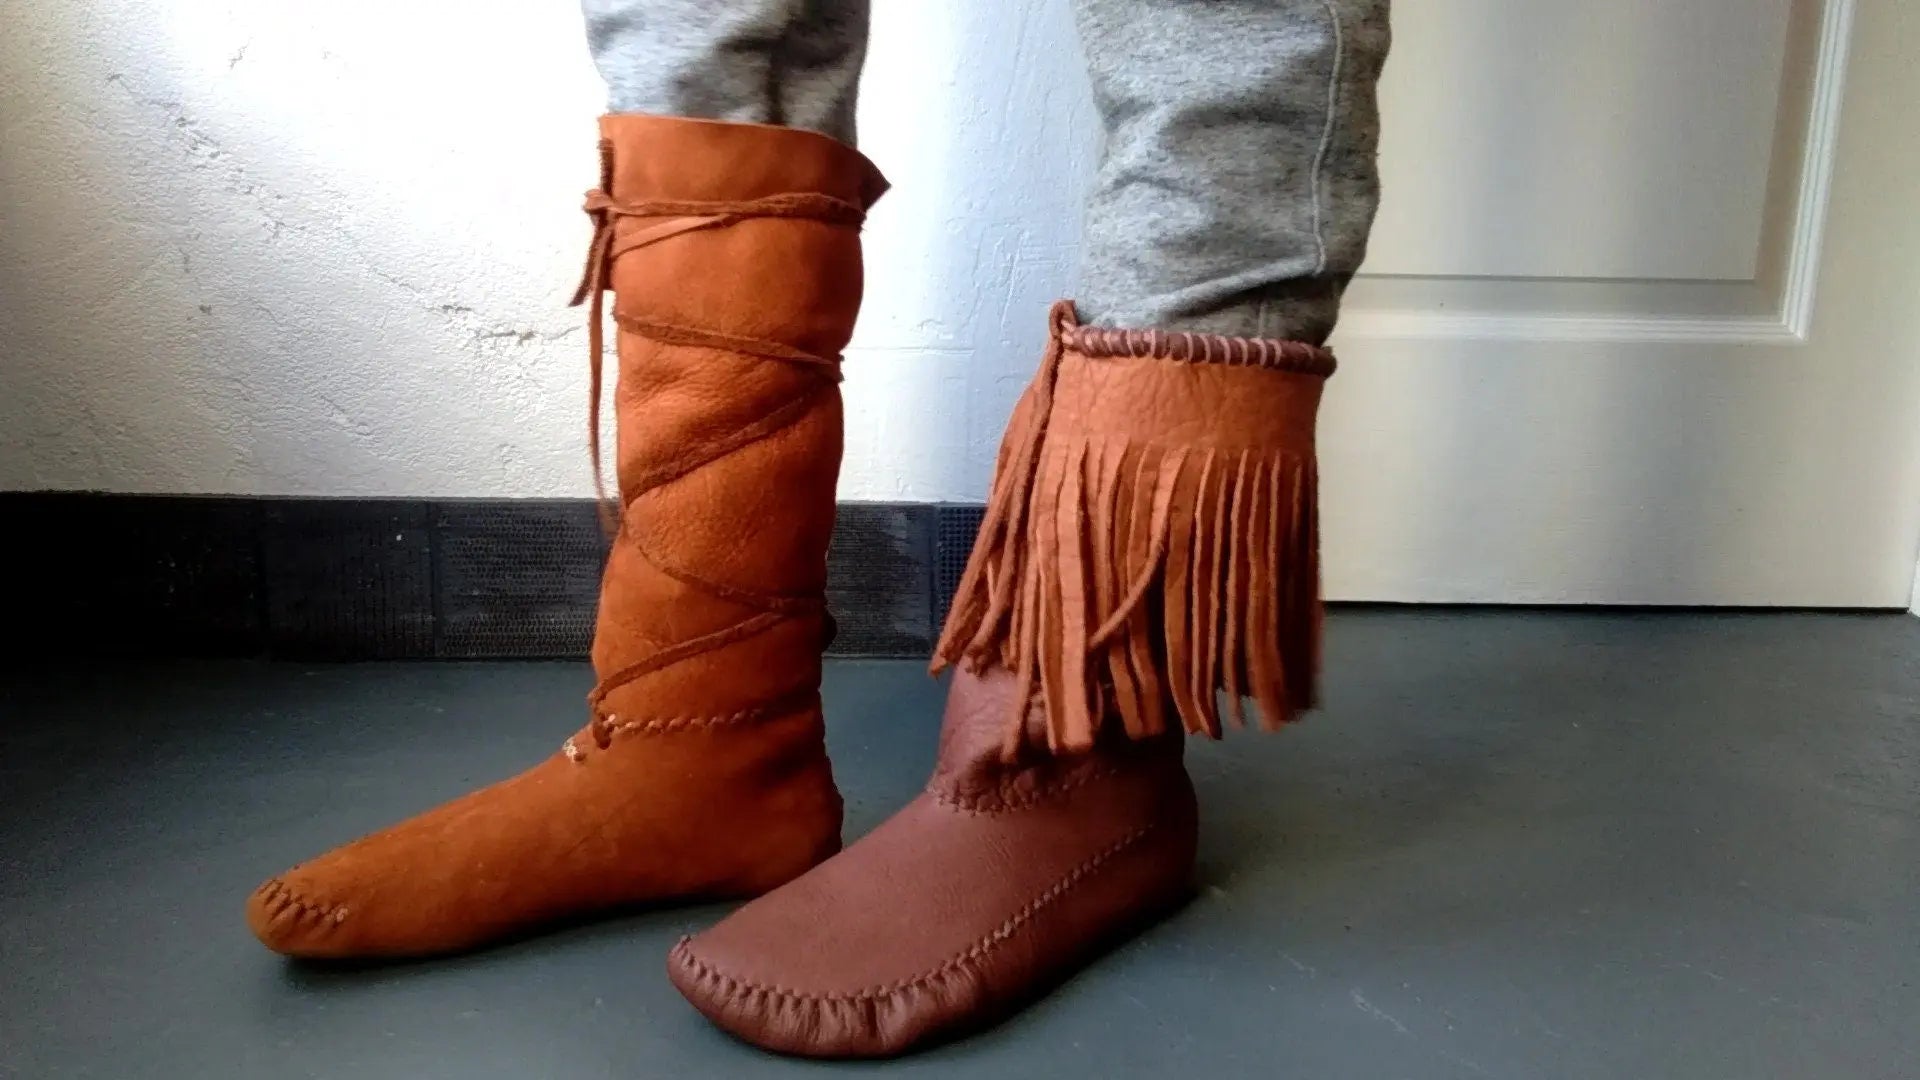 High Boot Kit + "The Base" Tutorial & Patterns - Make your own Patterns for Moccasins in 10+ Different Styles Earthingmoccasins